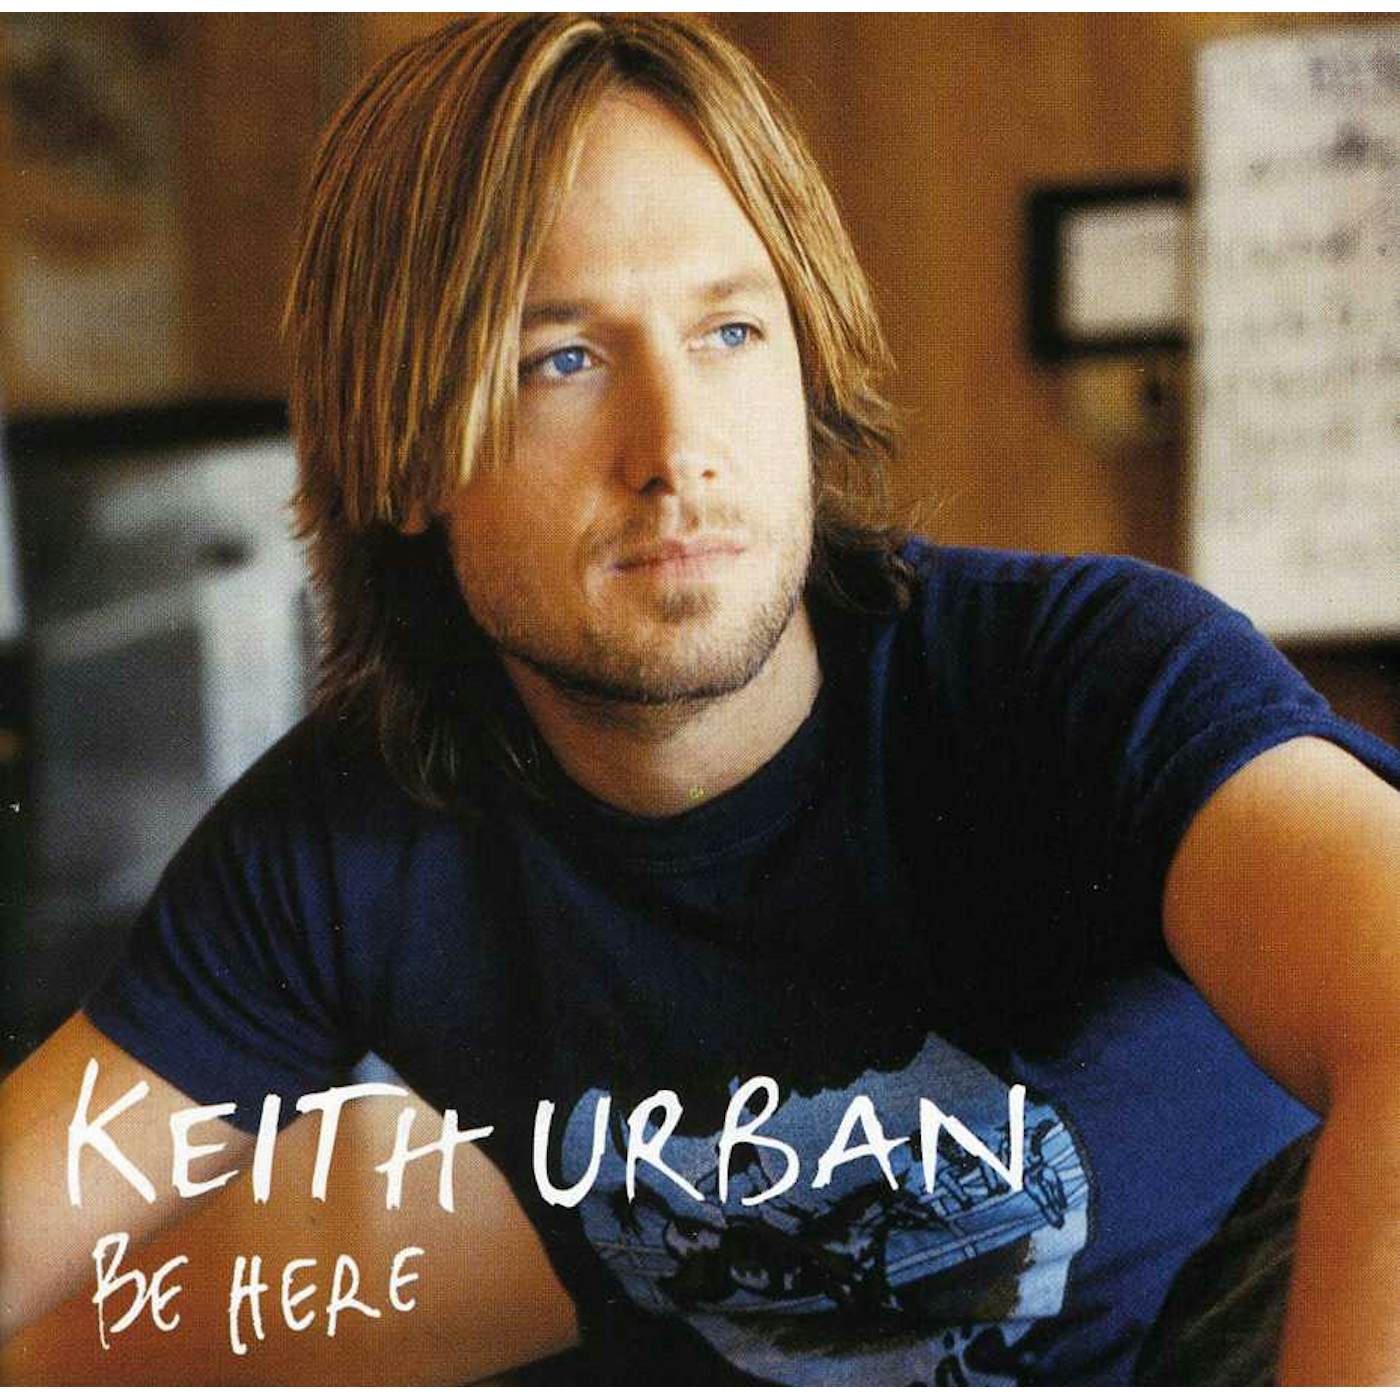 Keith Urban BE HERE CD